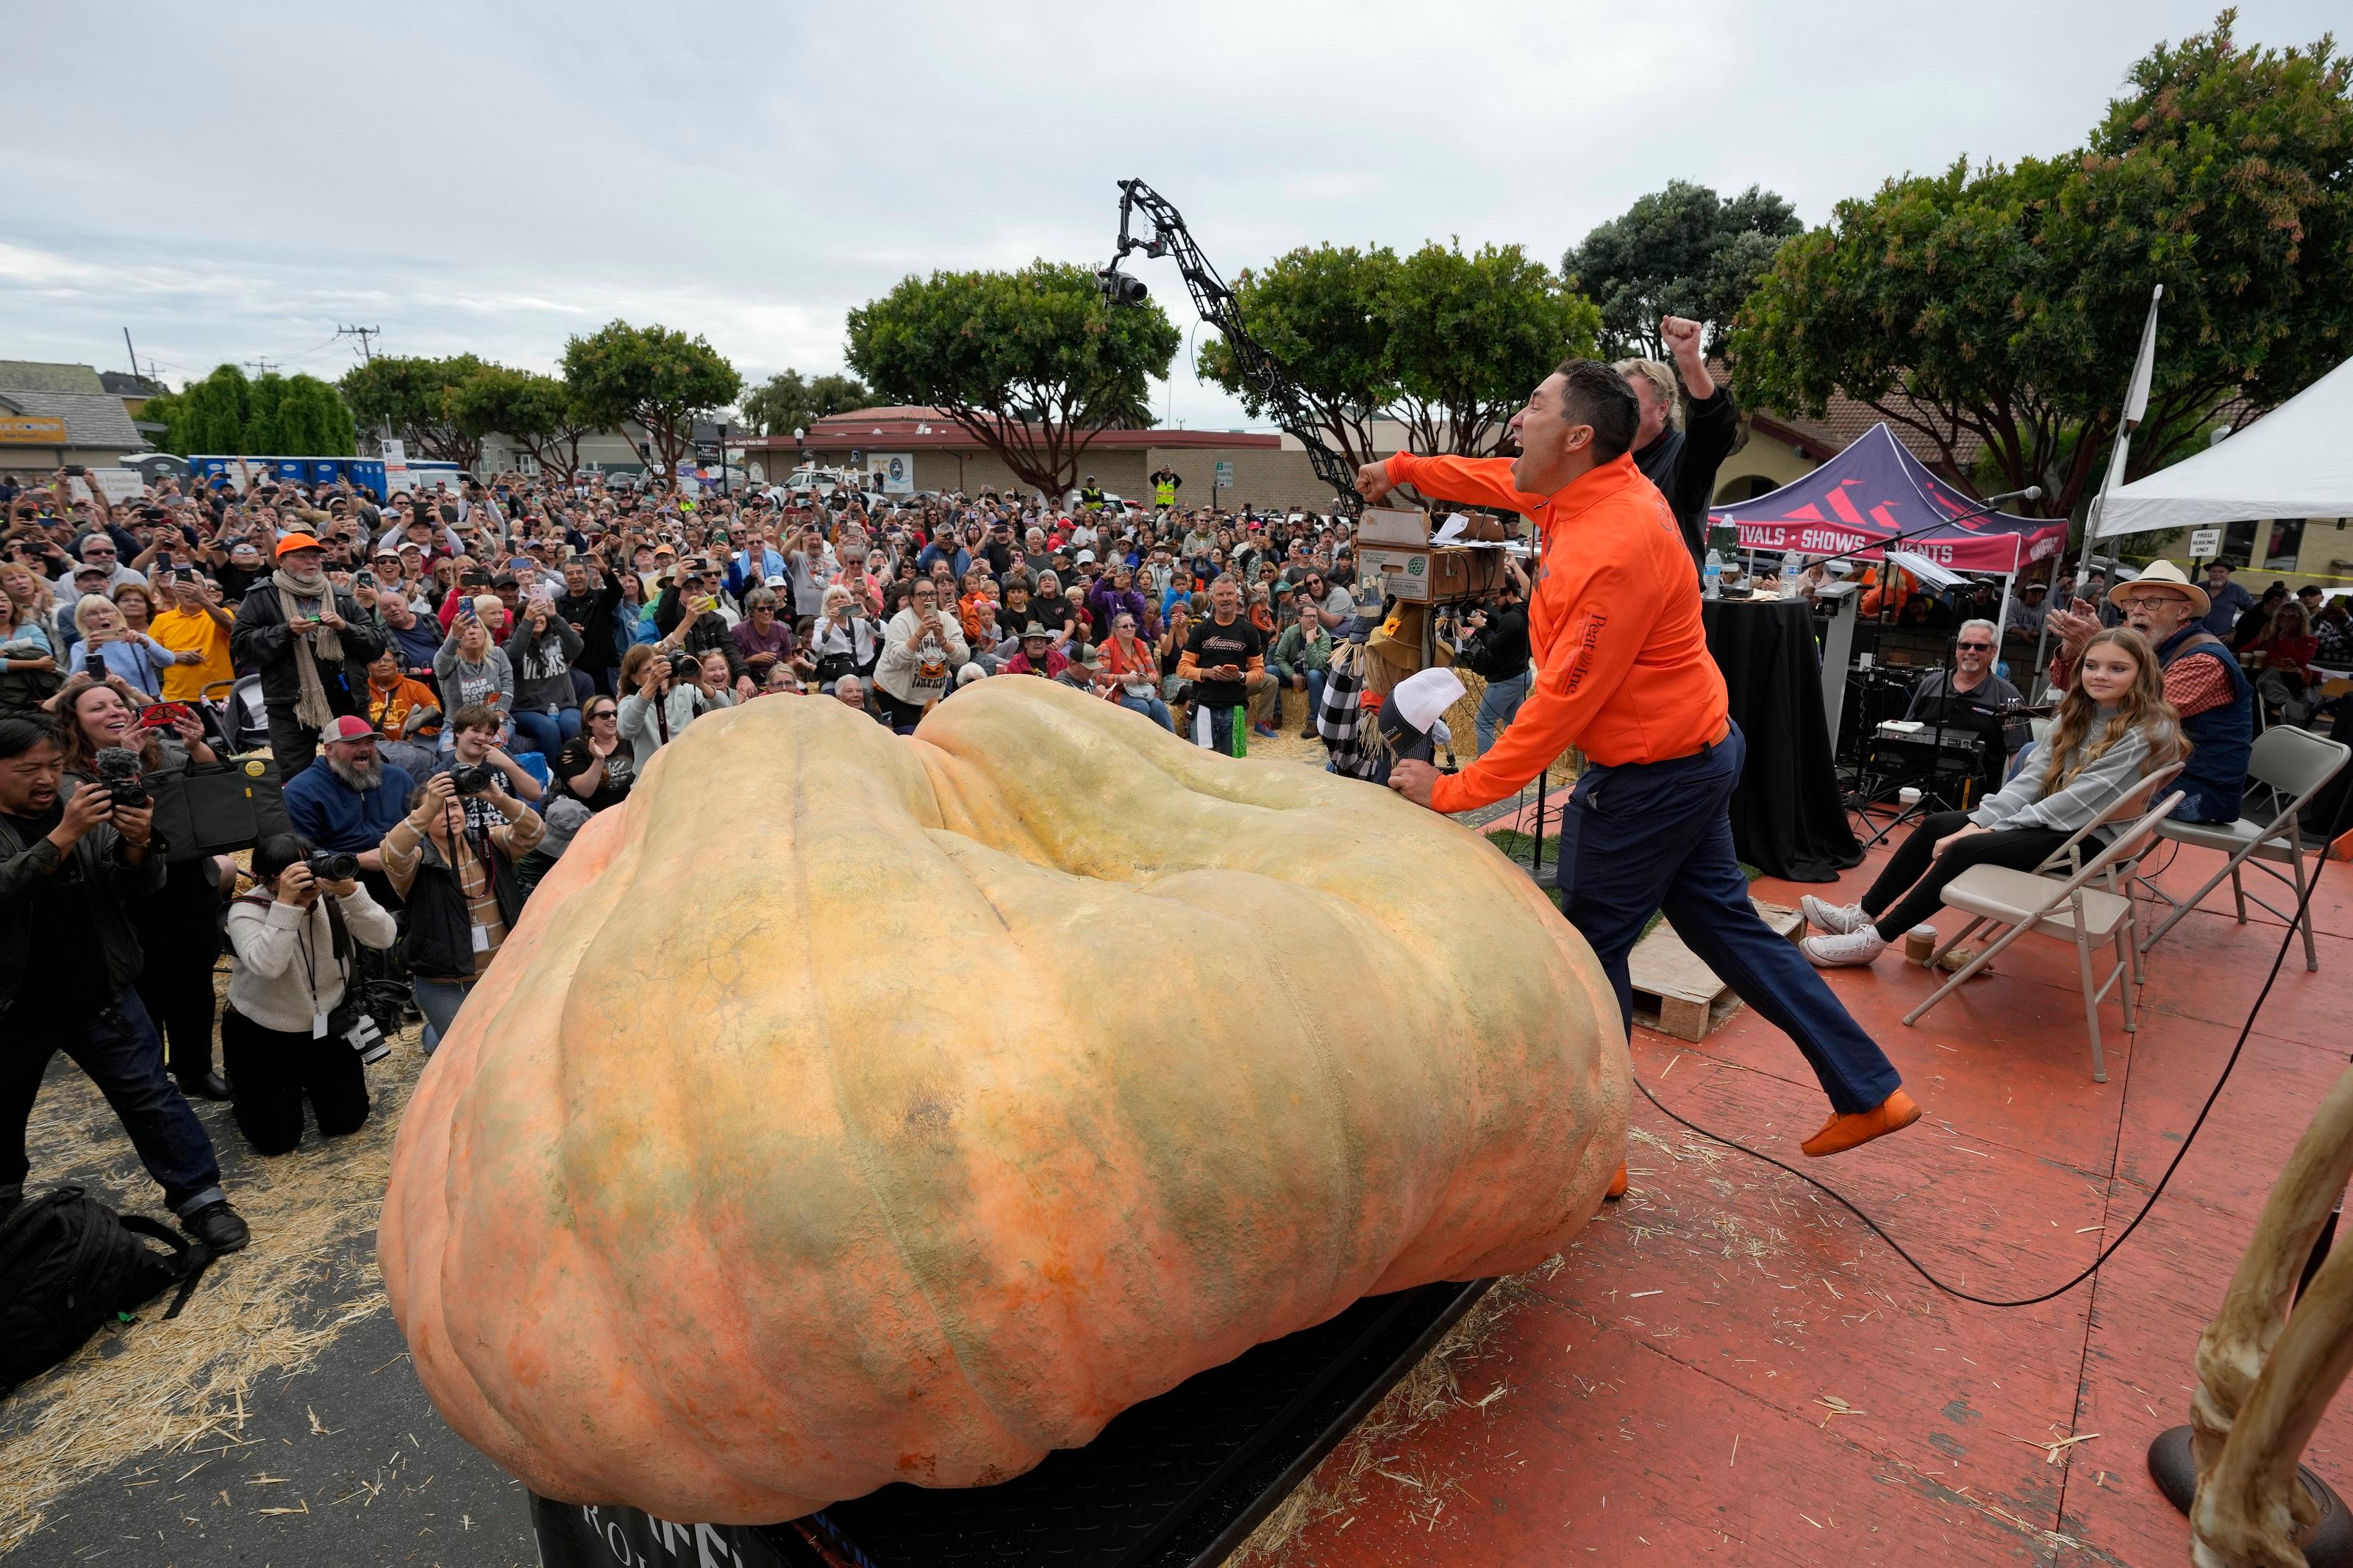 Pumpkin Weighing 2,749 Pounds Wins California Contest, Sets World Record for Biggest Gourd